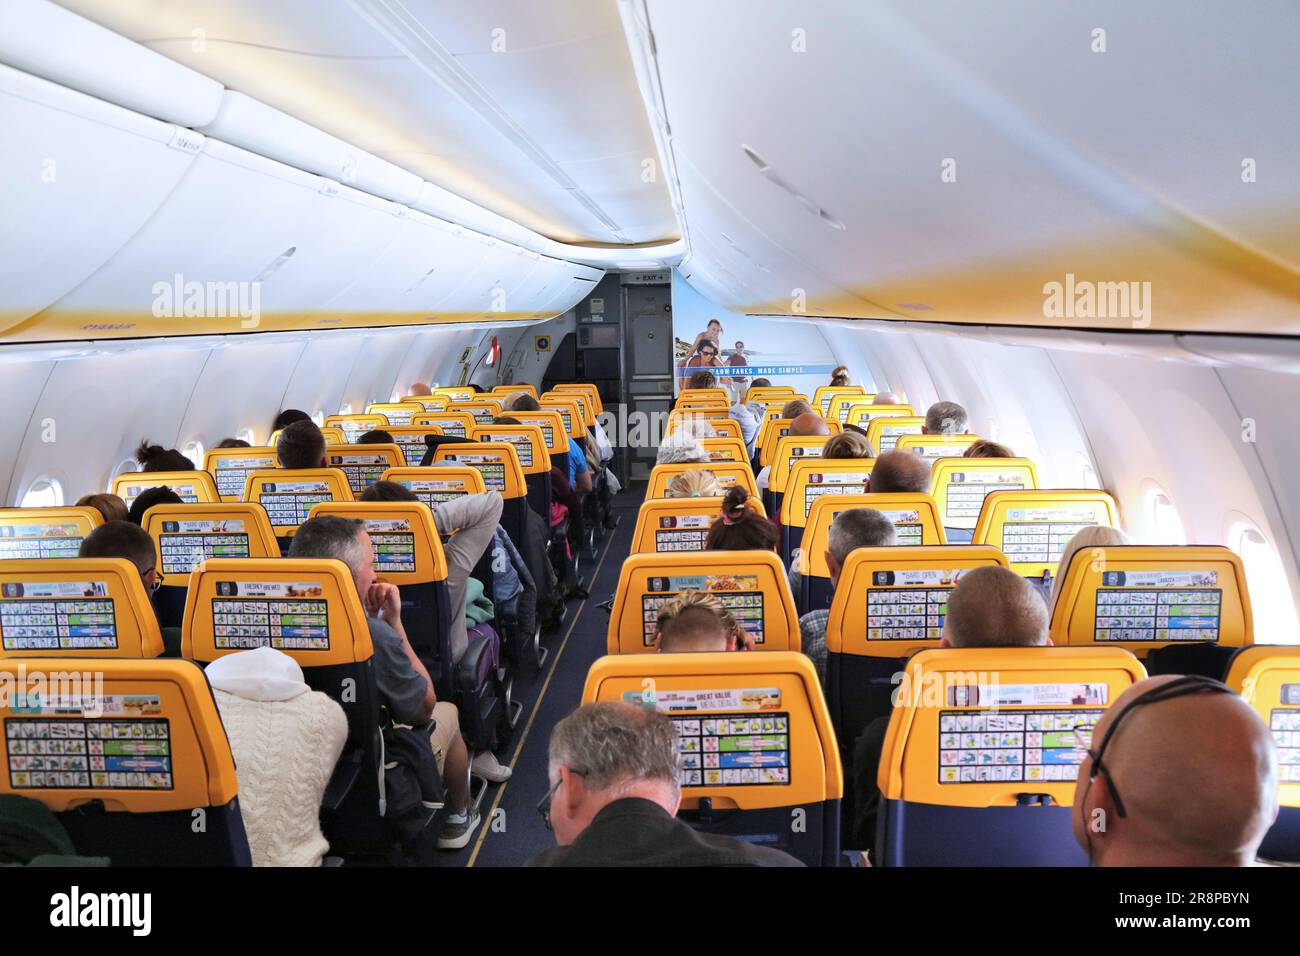 MILAN, ITALY - MAY 30, 2023: Cabin interior of Boeing 737-800 passenger airplane of low cost airline Ryanair operating from Italy. Stock Photo